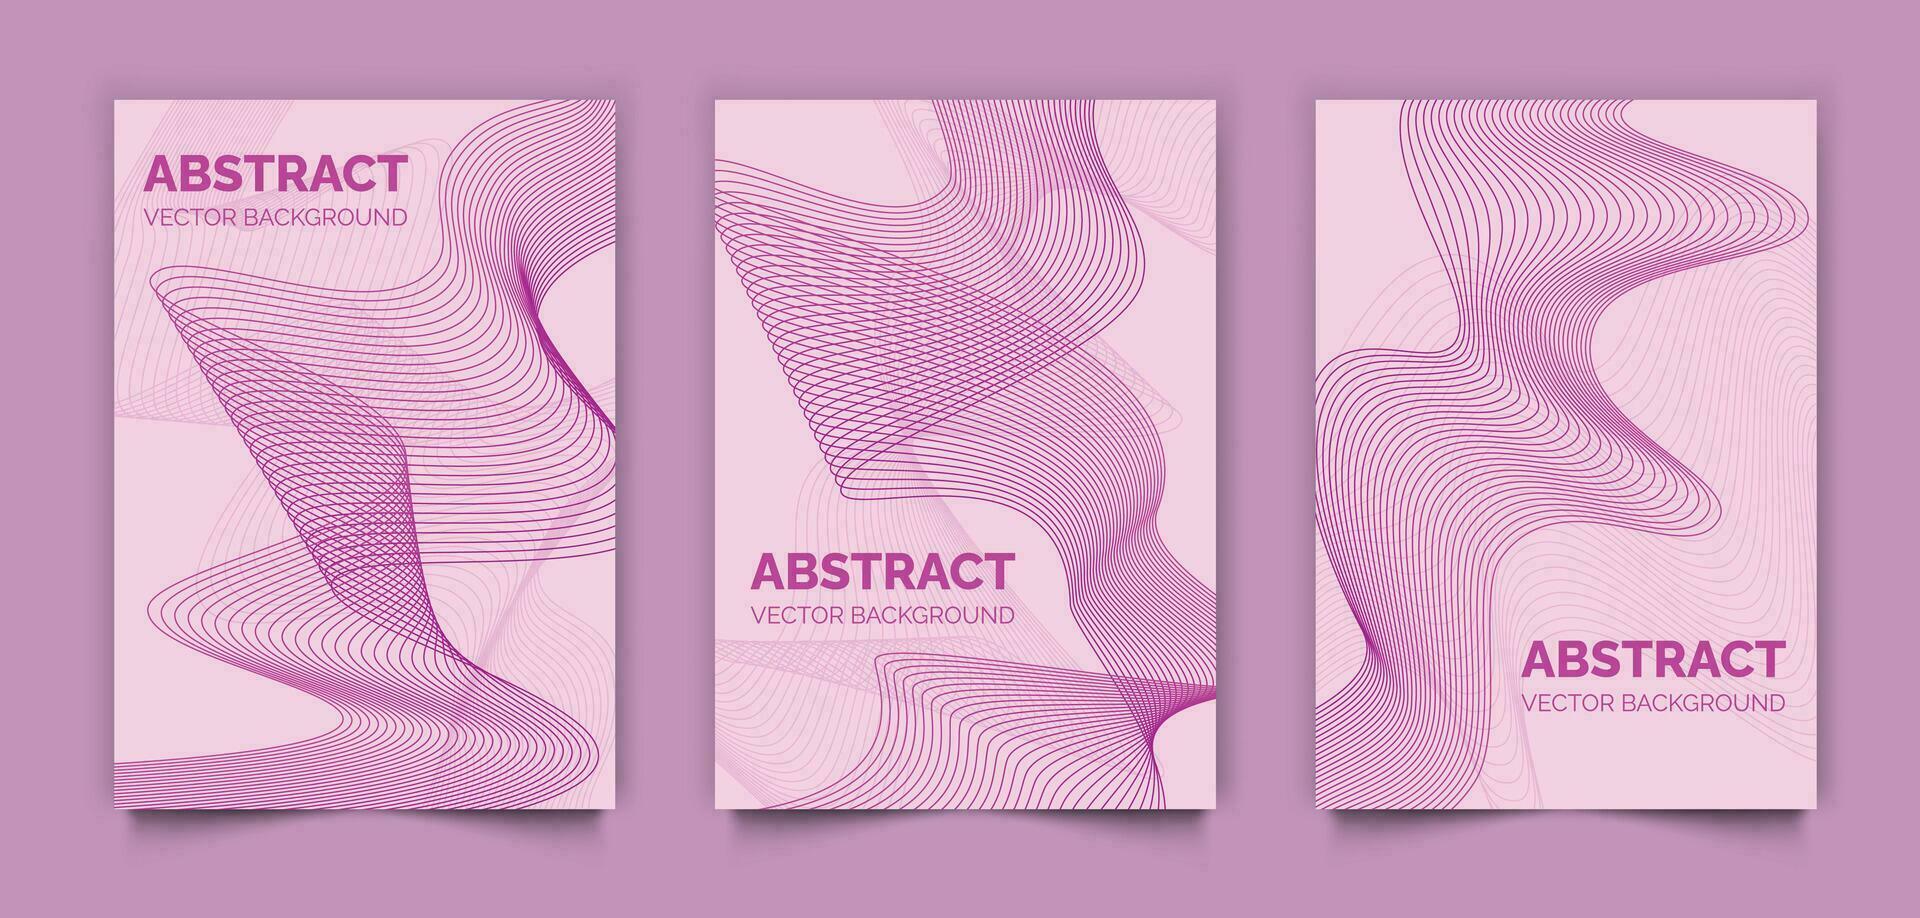 Set of abstract modern book covers design, pink lines vector background, minimal template design for cover or web